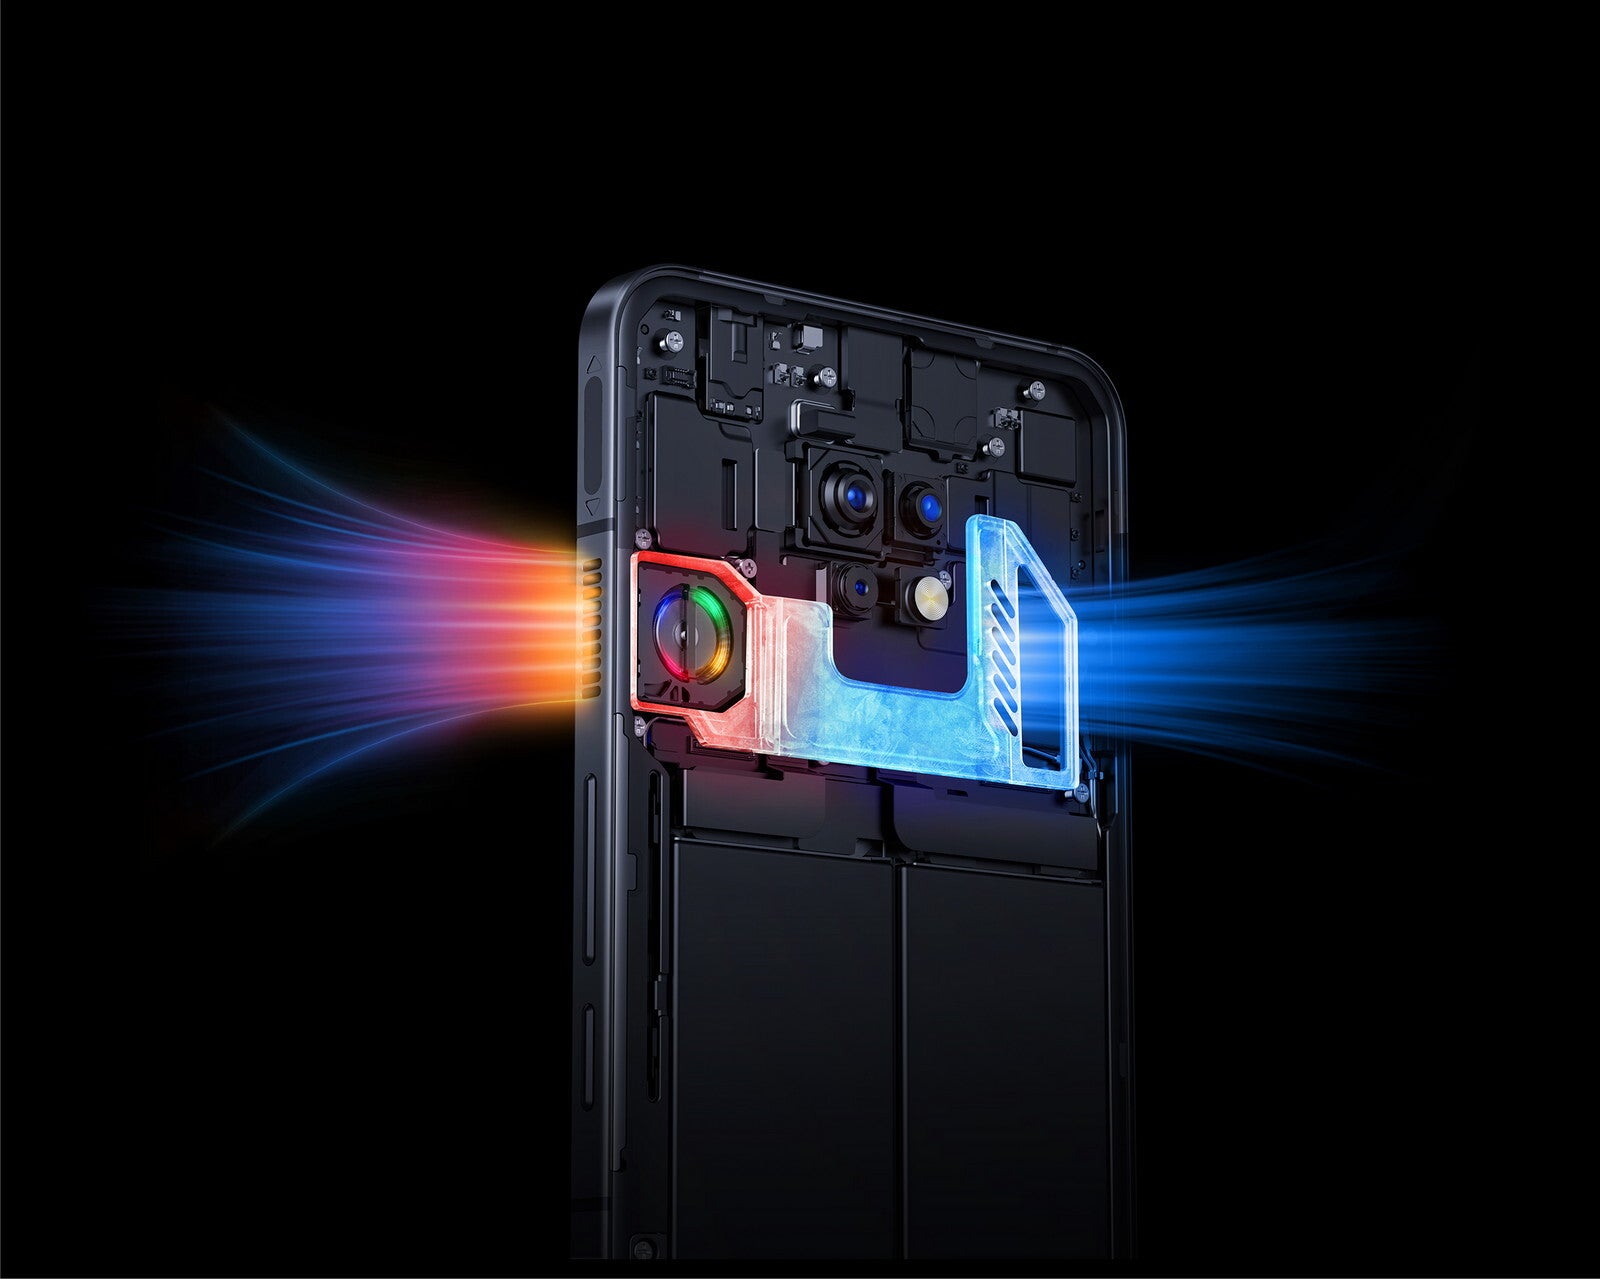 RedMagic 7S Pro: supercharged gaming phone, pre-order and get $30 off!